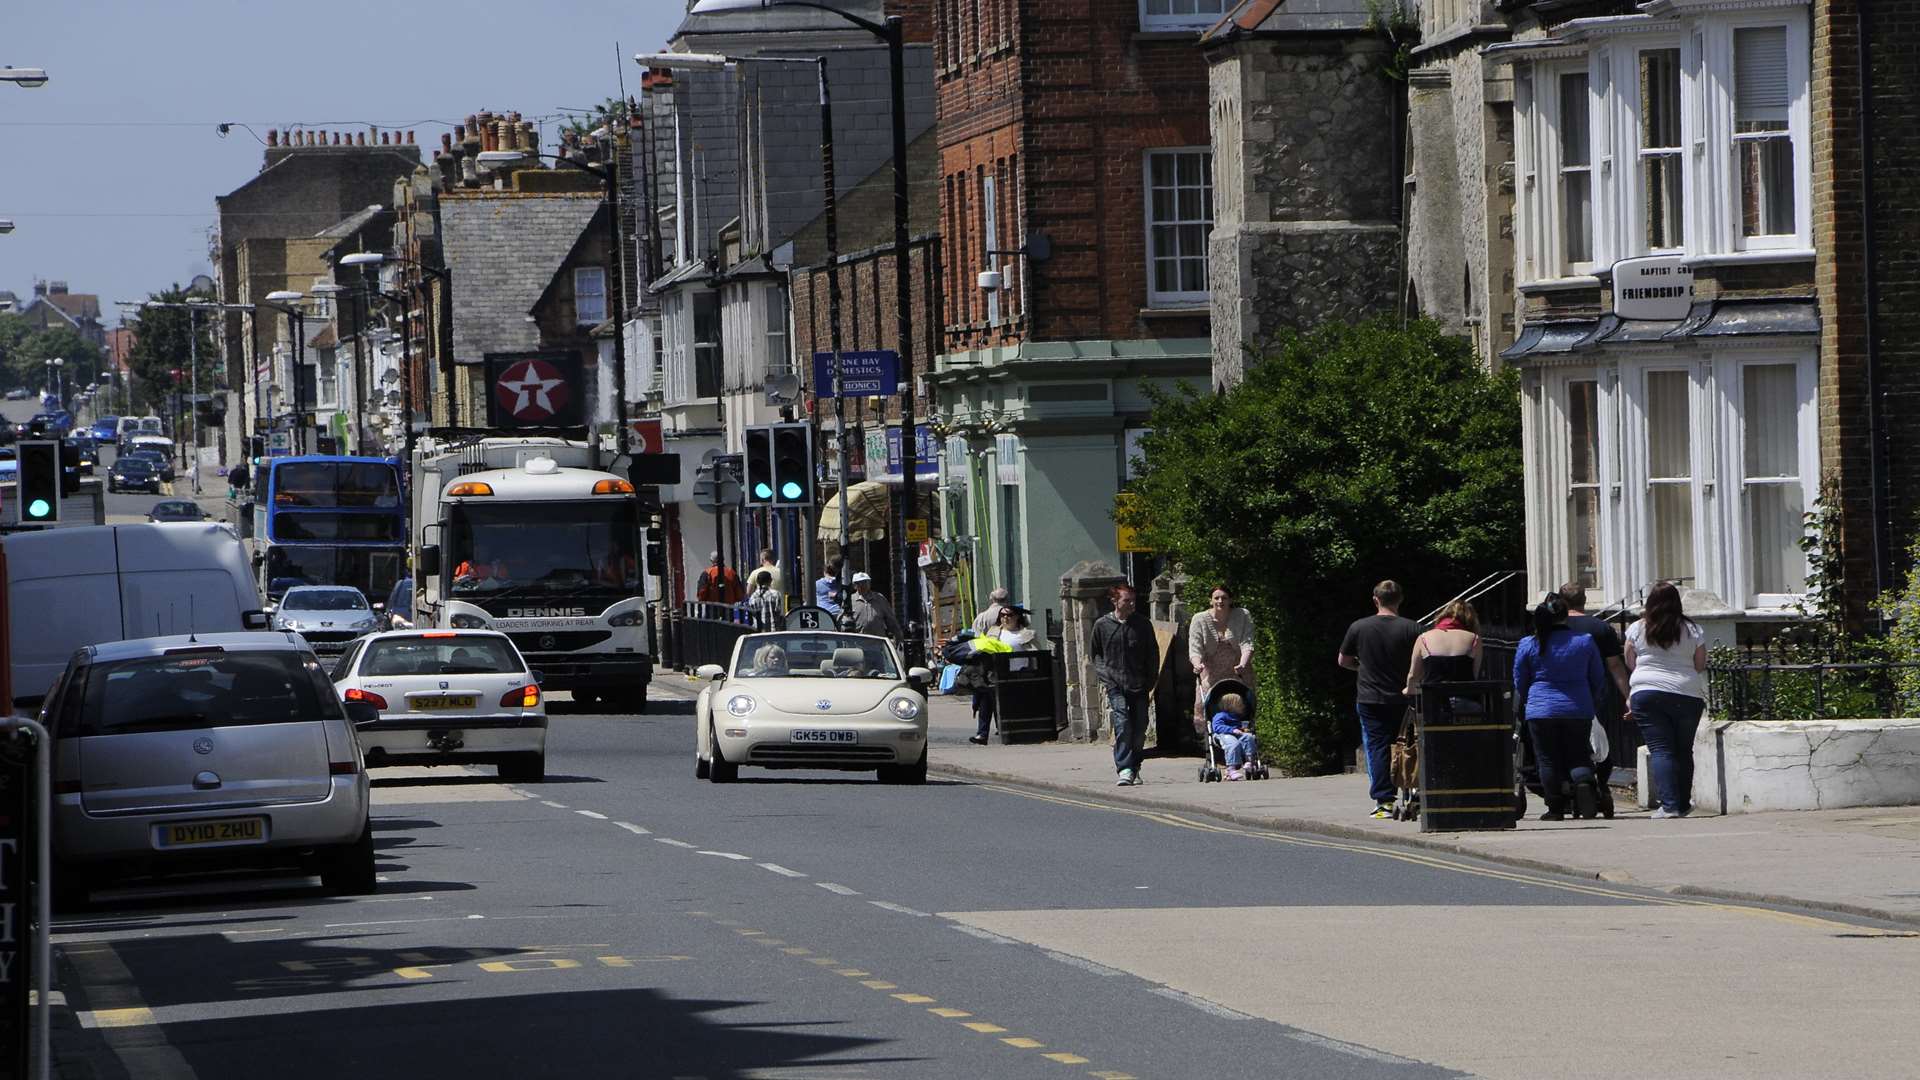 The incident reportedly happened in Herne Bay High Street